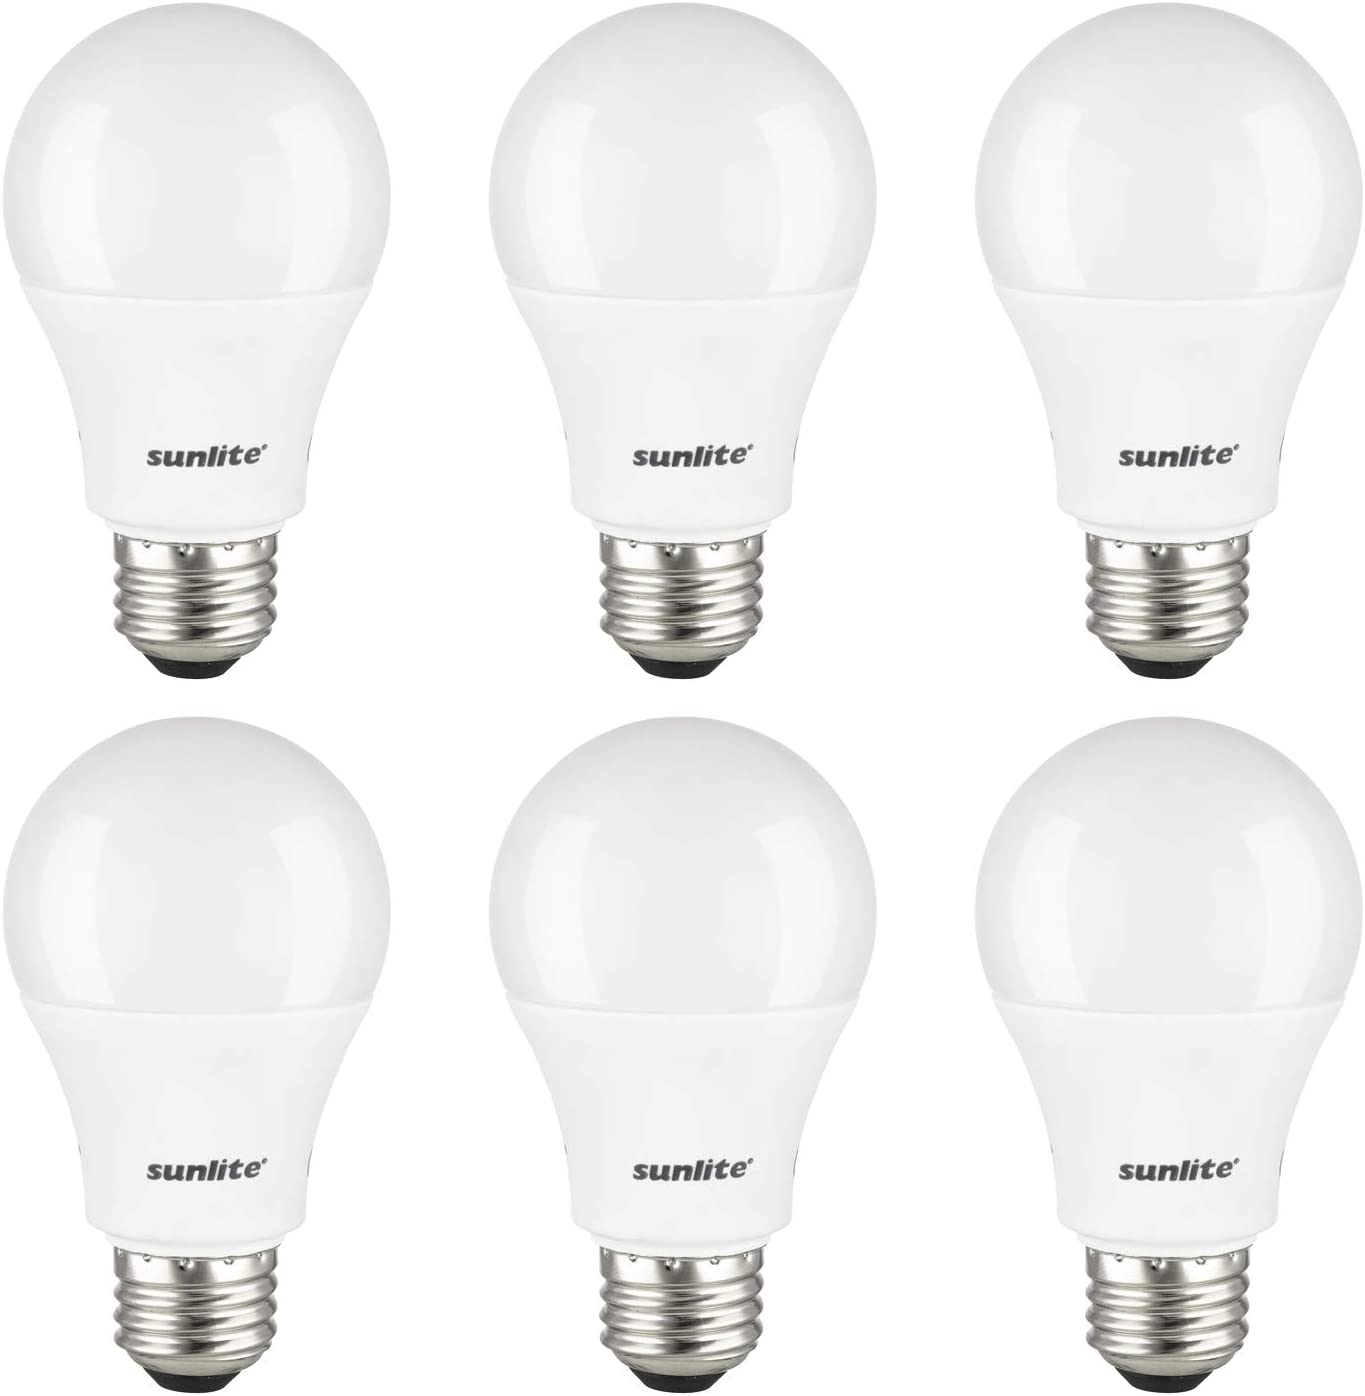 Sunlite 80936-SU LED A19 Light Bulbs, 14 Watts (100W Equivalent), 1500 Lumens, Medium Base (E26), Non-Dimmable, UL Listed, 40K - Cool White Pack of 6